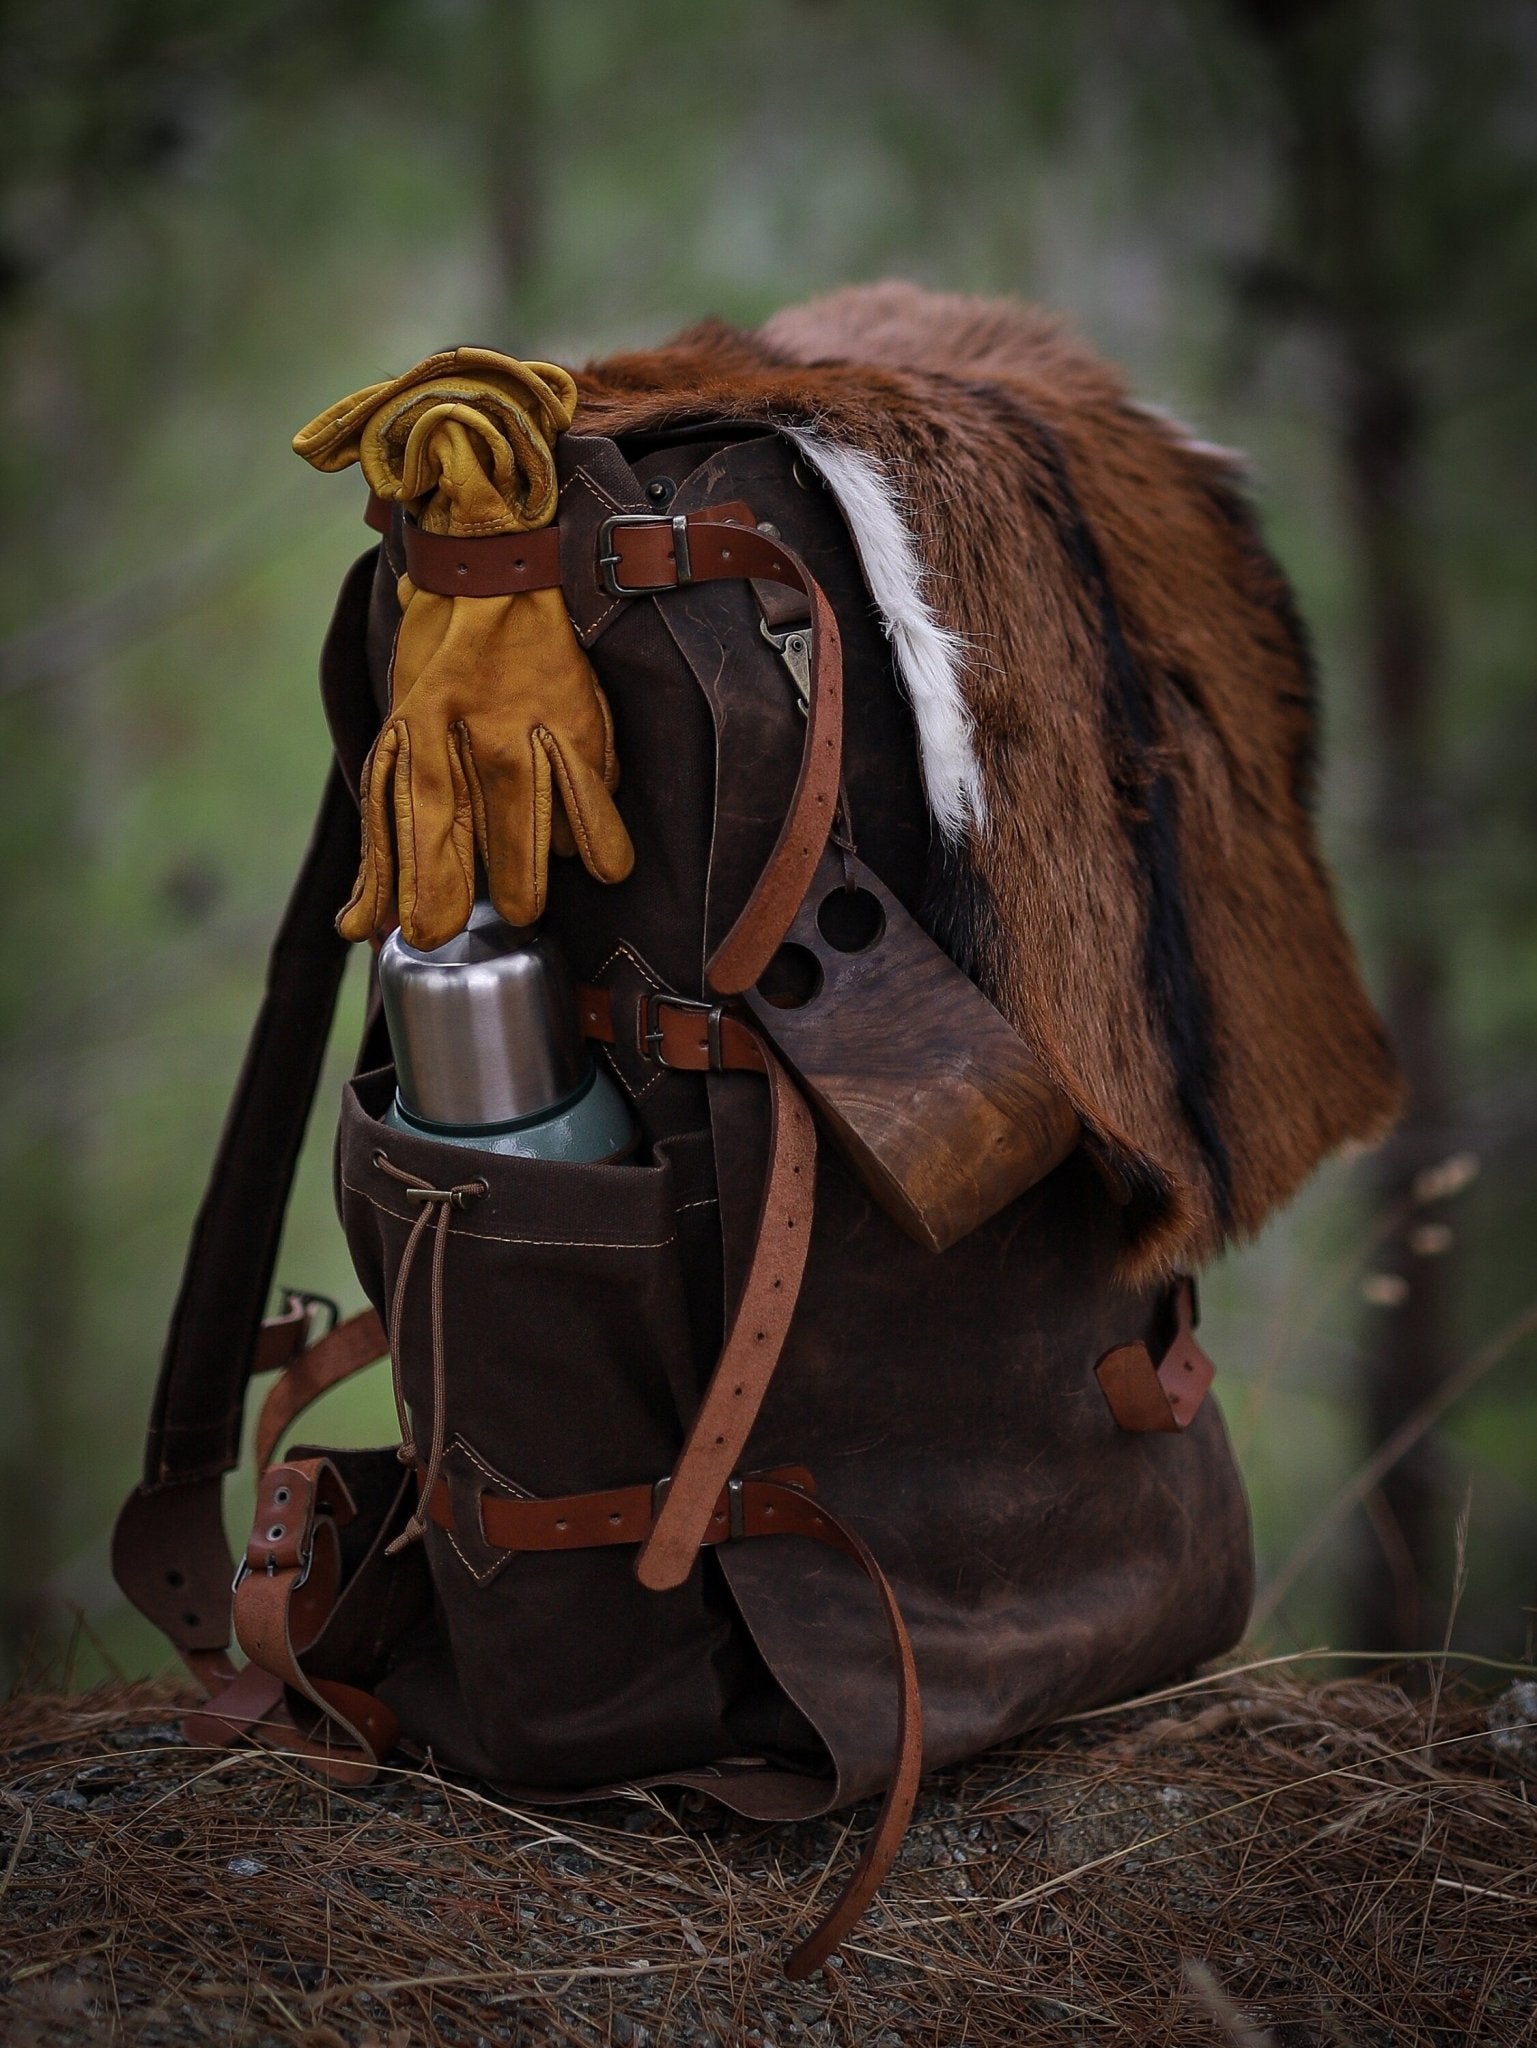 Goat Fur , Canvas and Leather Bag | Bushcraft | Camping | Outdoor | Hiking | Handmade Backpack l  | 30,40,50 Litres option  99percenthandmade   